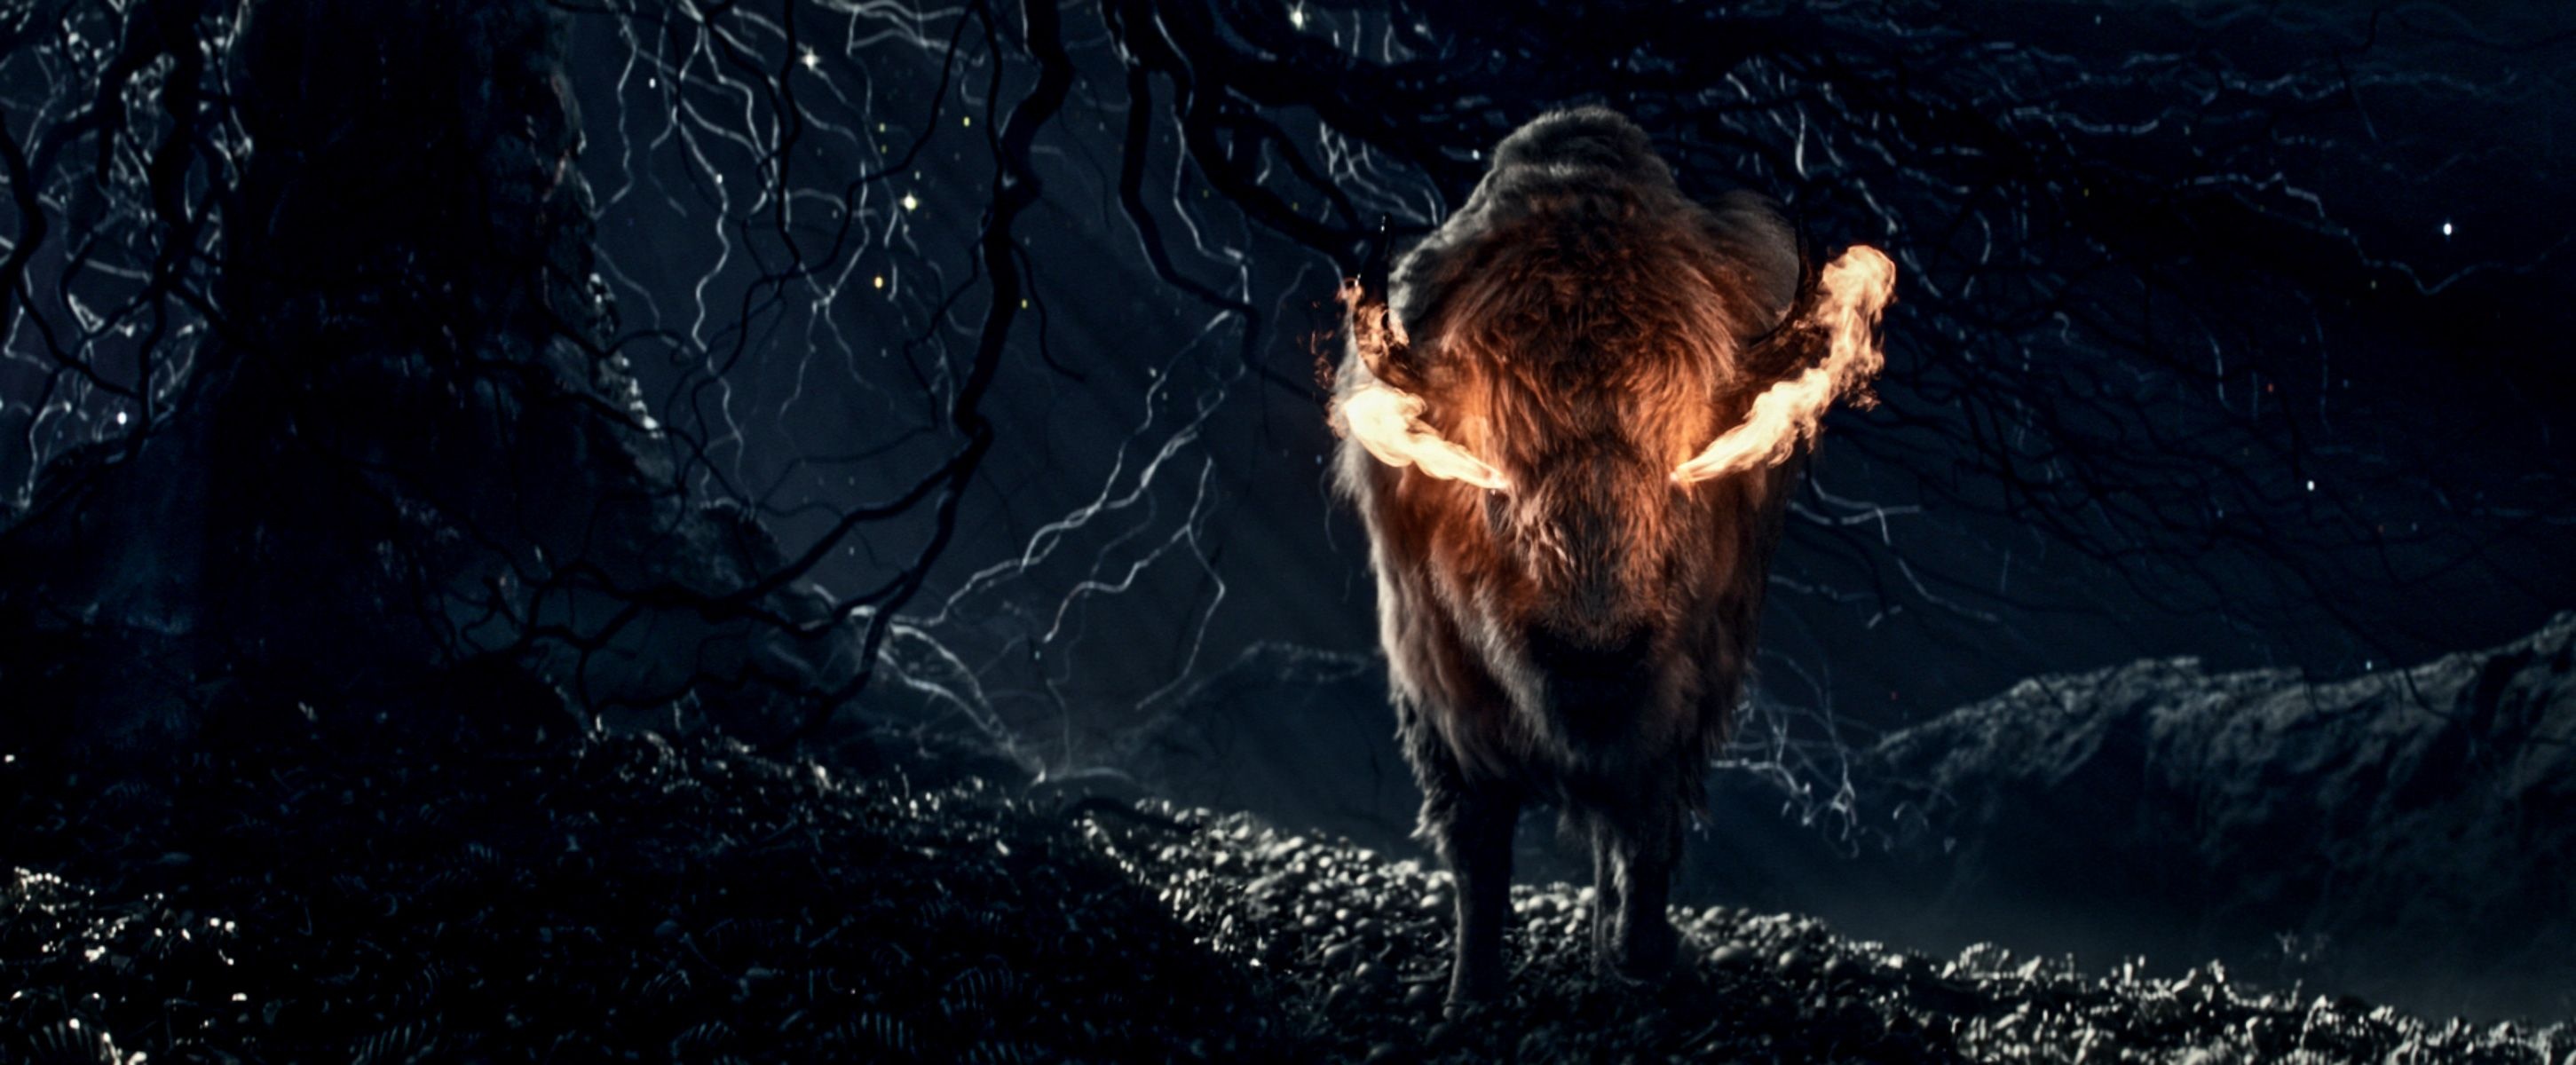 American Gods explained, Guide to deities, Old and new, Enigmatic, 2910x1200 Dual Screen Desktop